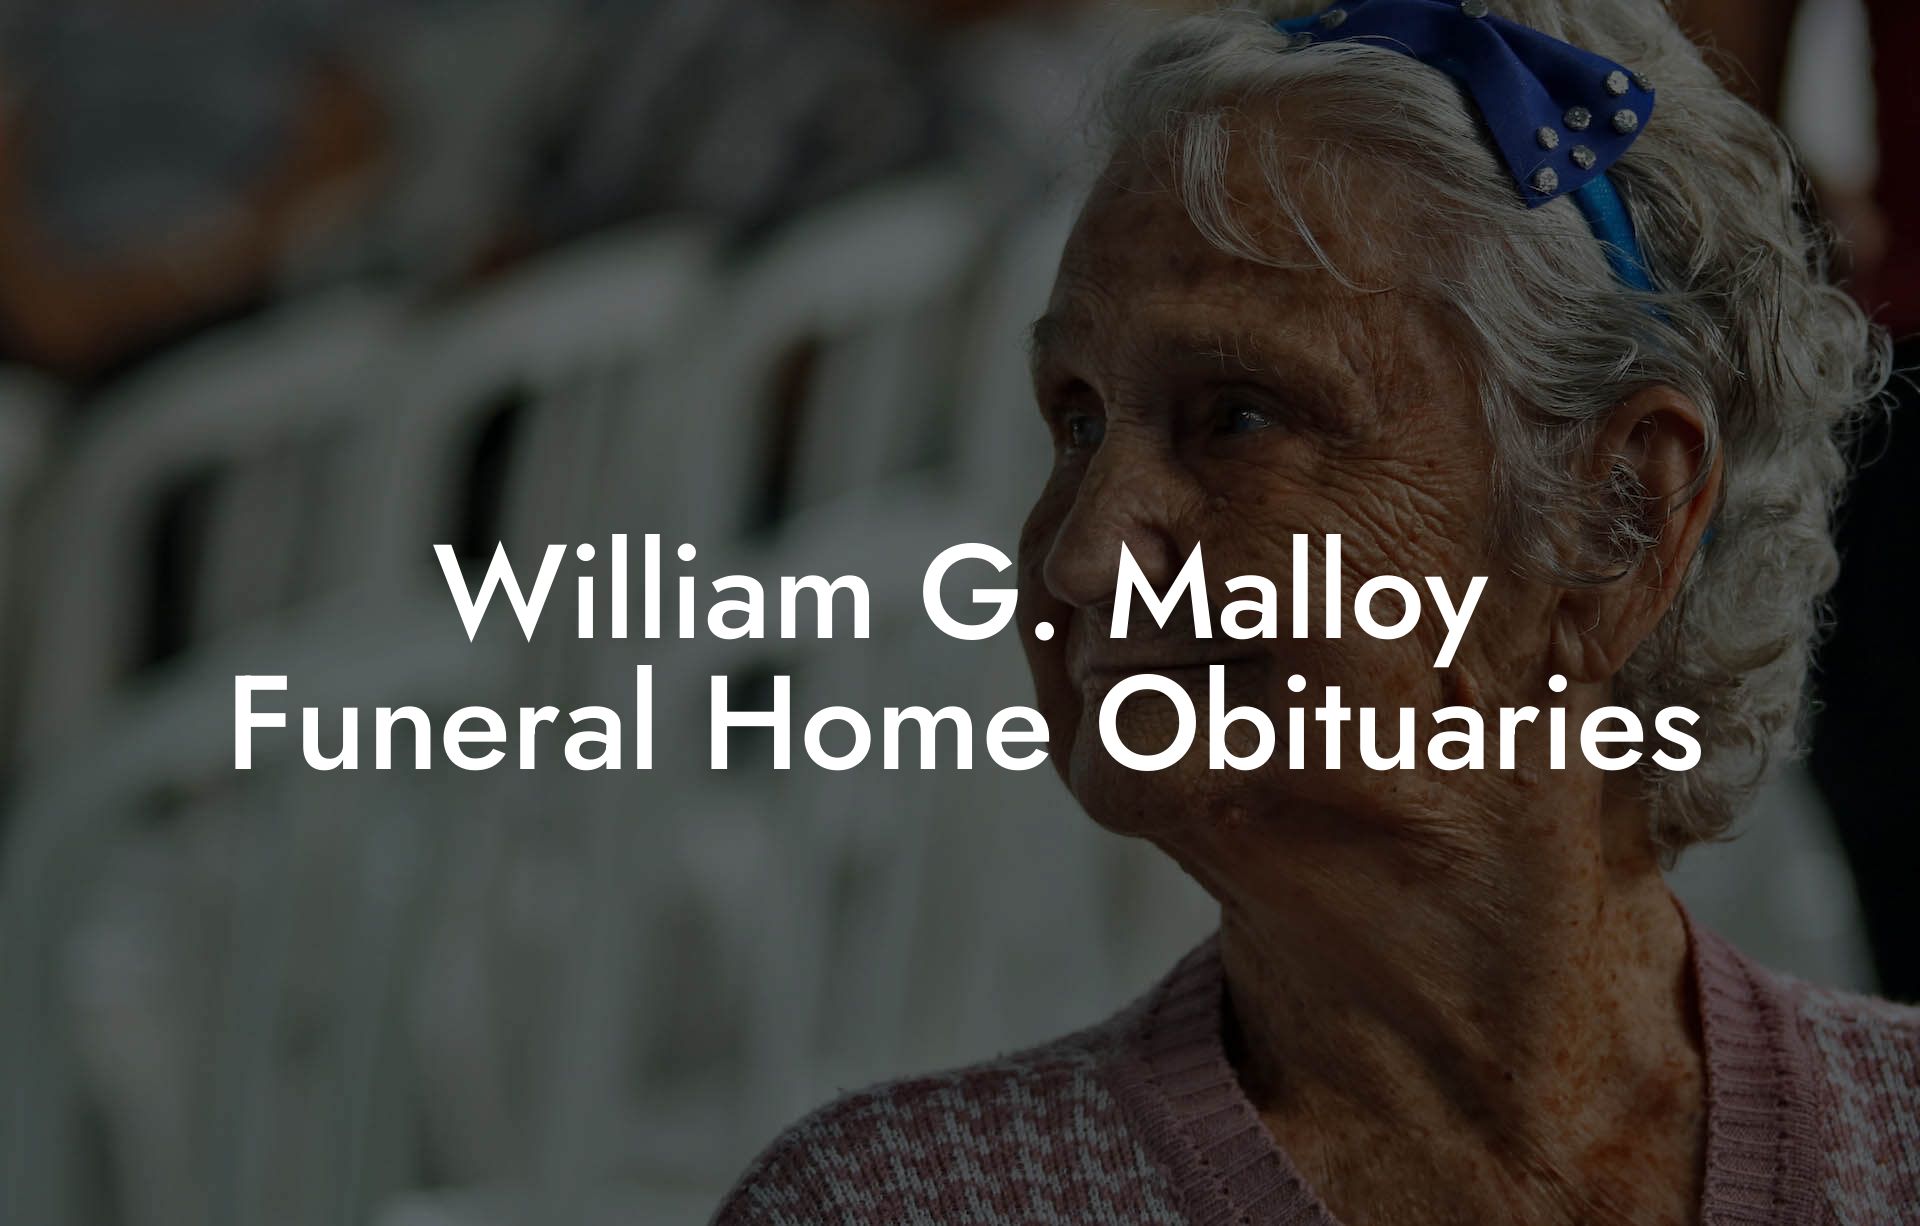 William G. Malloy Funeral Home Obituaries